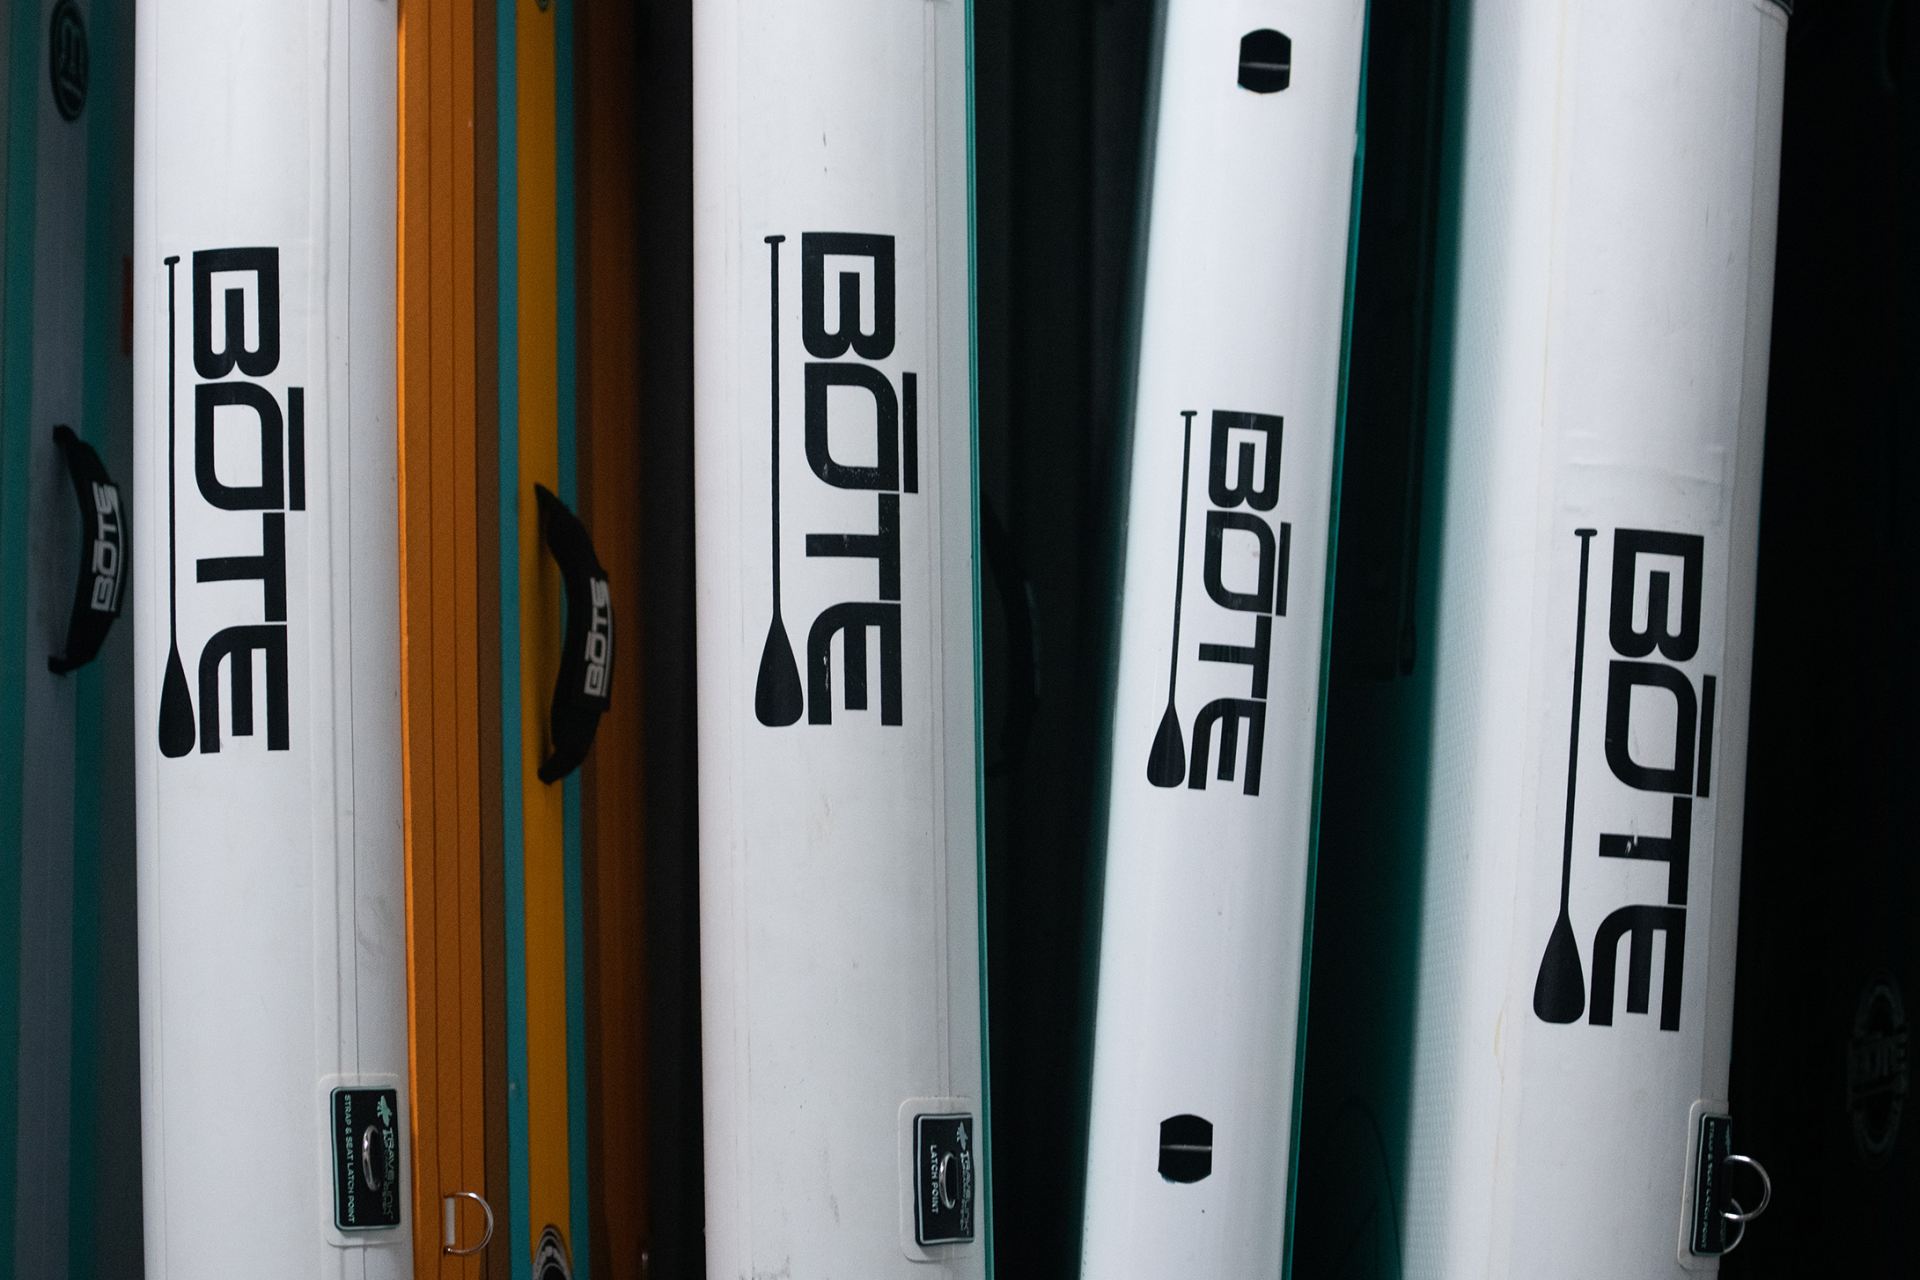 BOTE boards lined up